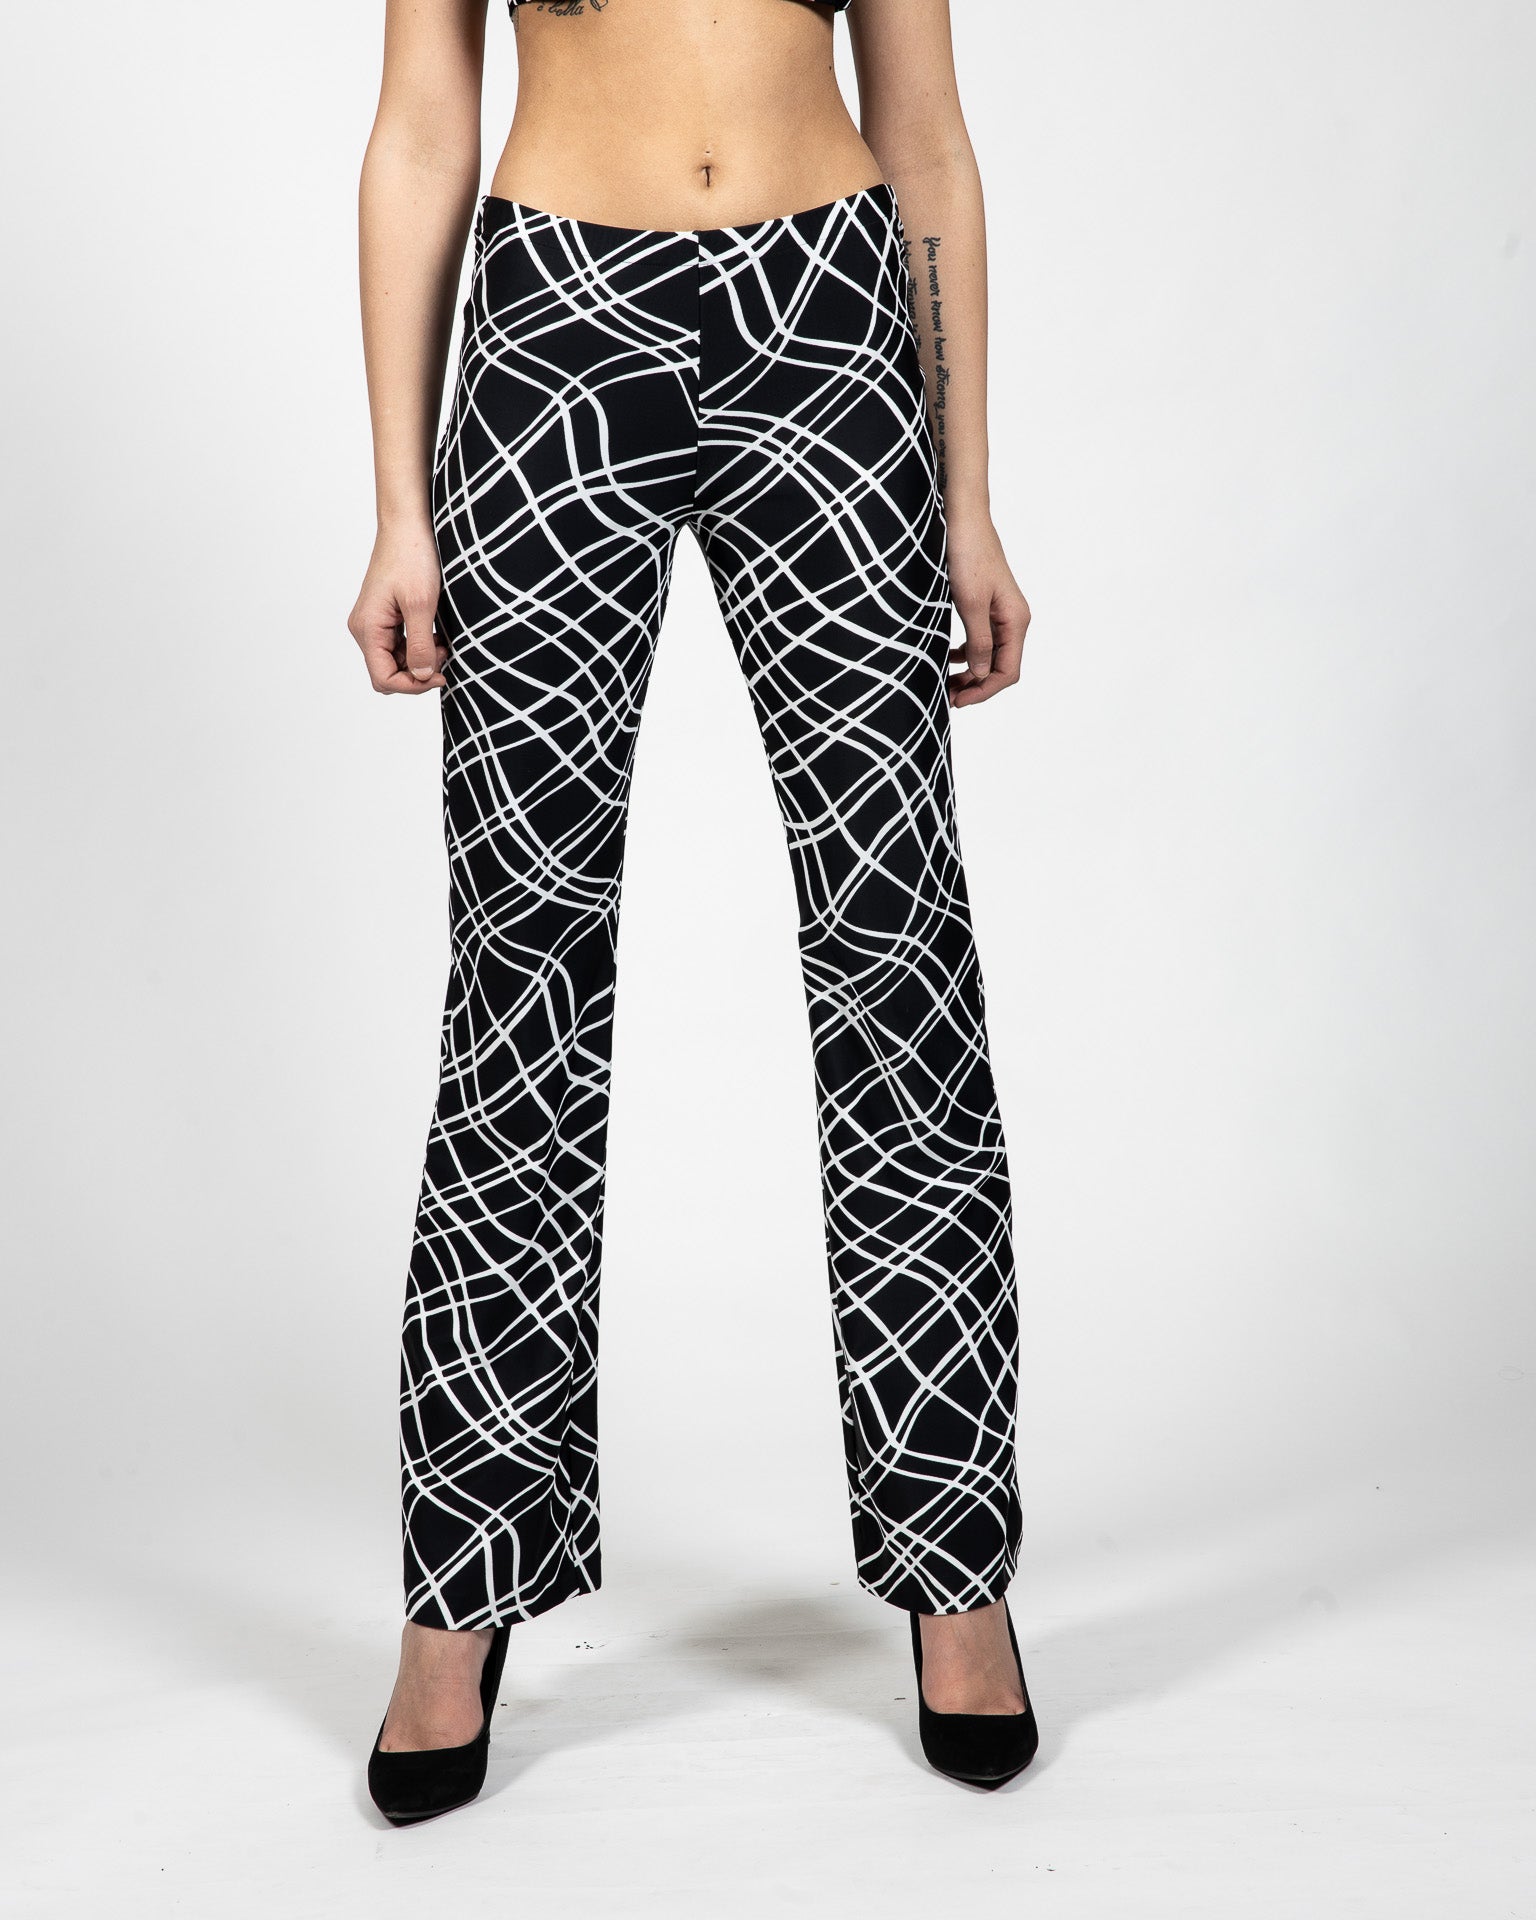 Printed Cropped Bra Top, Shorts And Pants With Waist Bands - Front View of Pants - Samuel Vartan